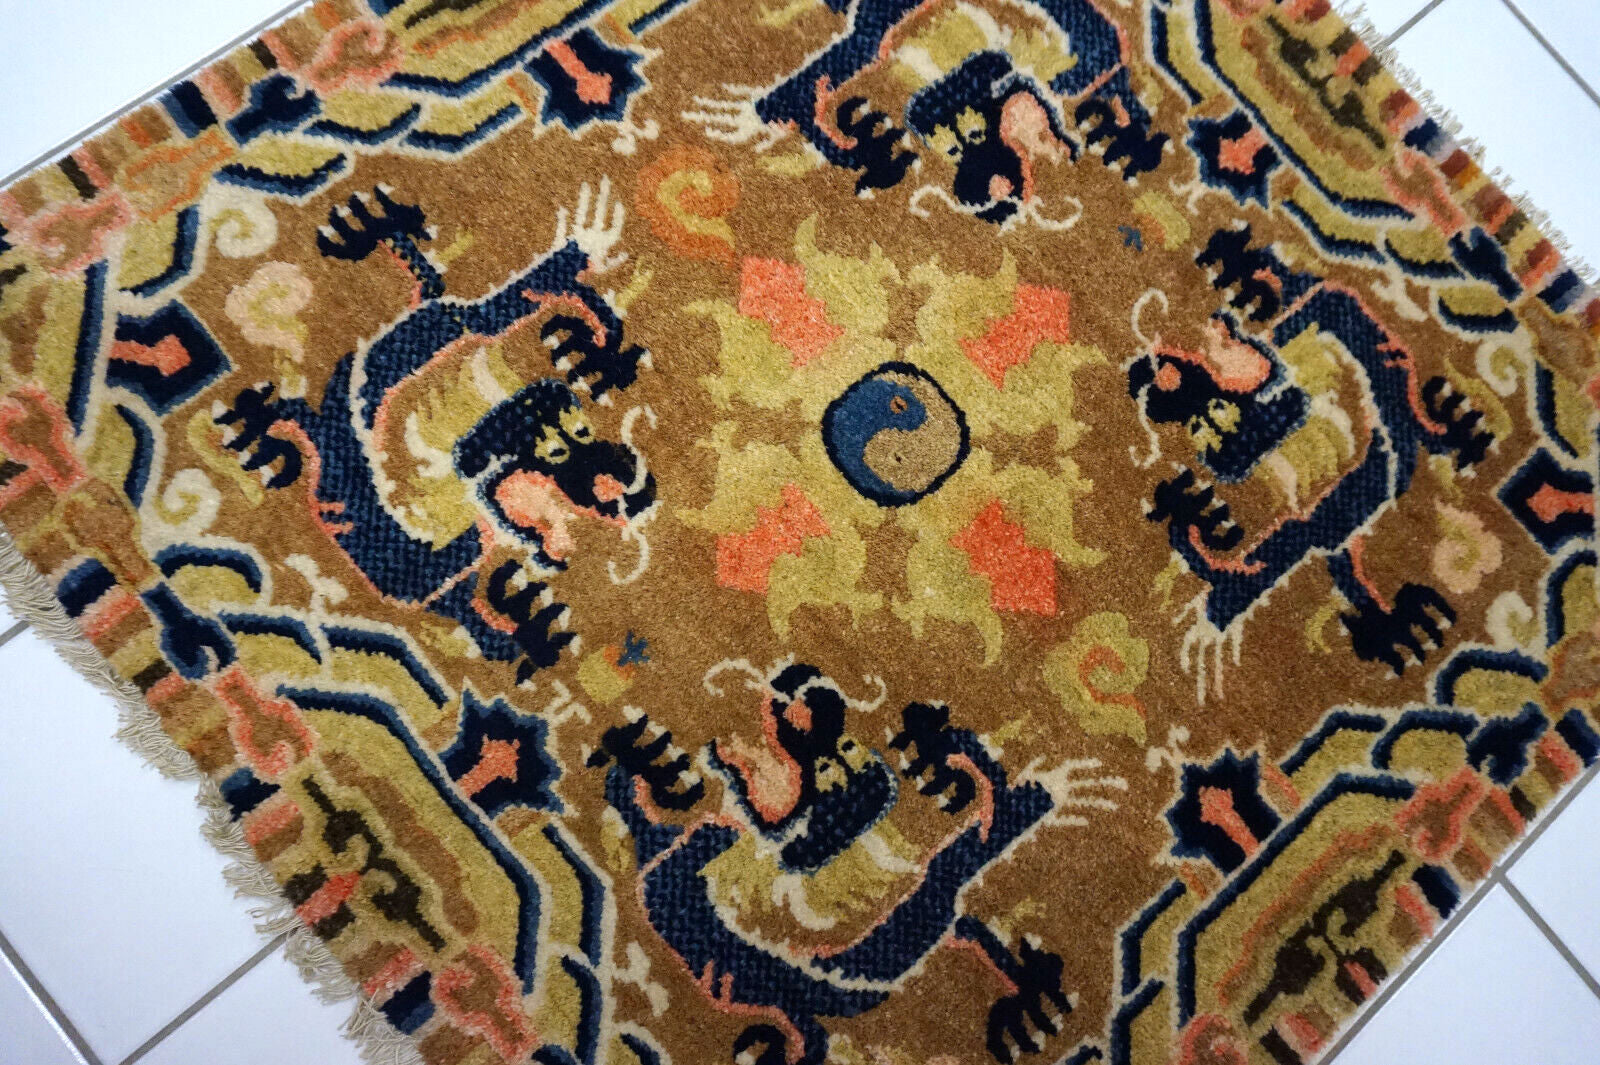 Antique wool rug with historic Chinese design